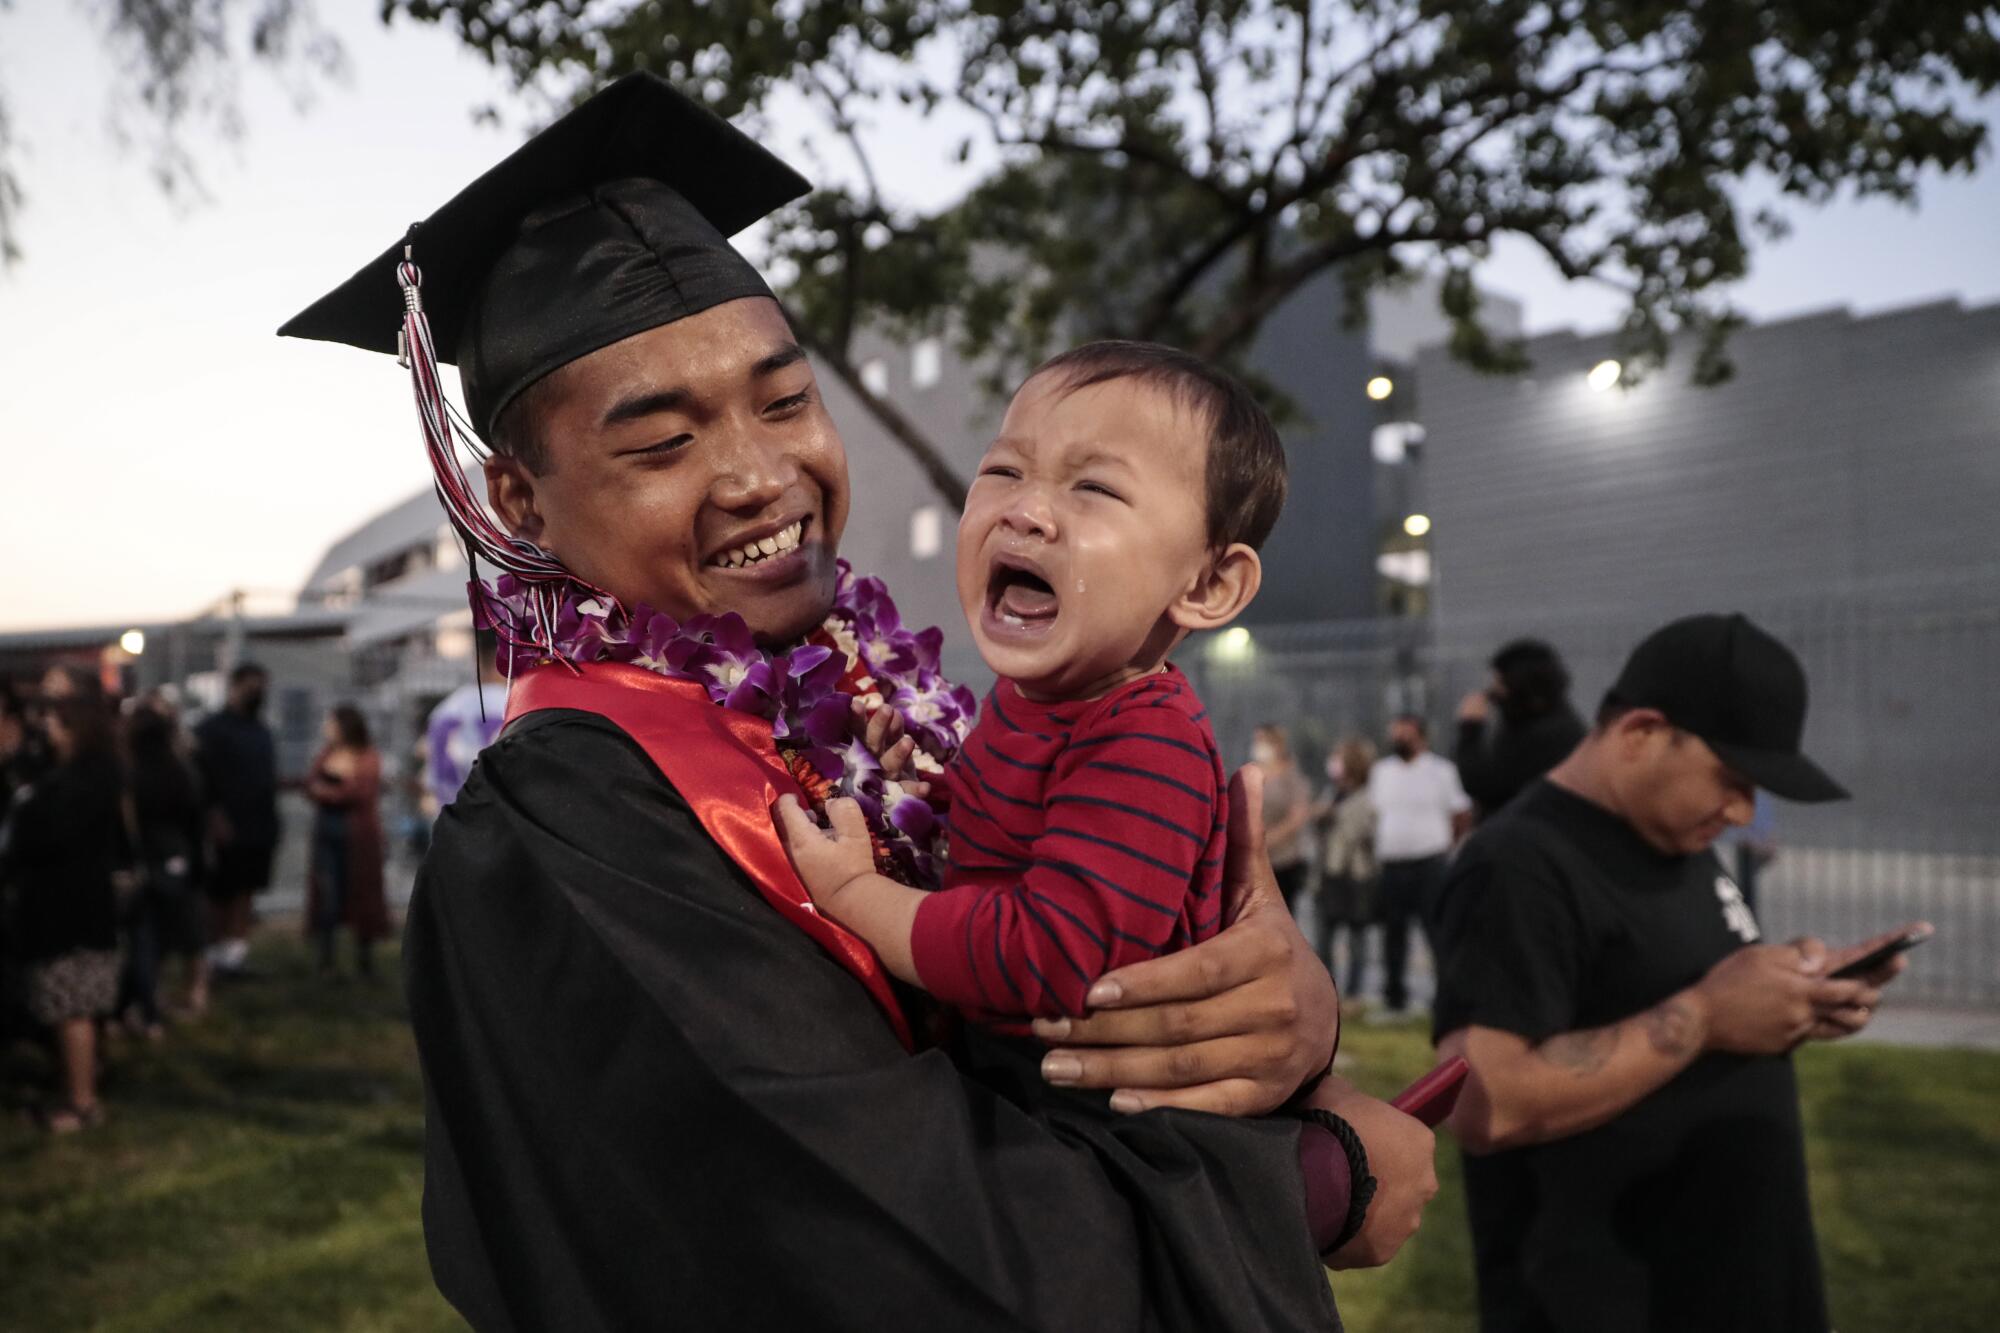 Johnny Sen, wearing a graduation cap and gown, holds a crying child.  